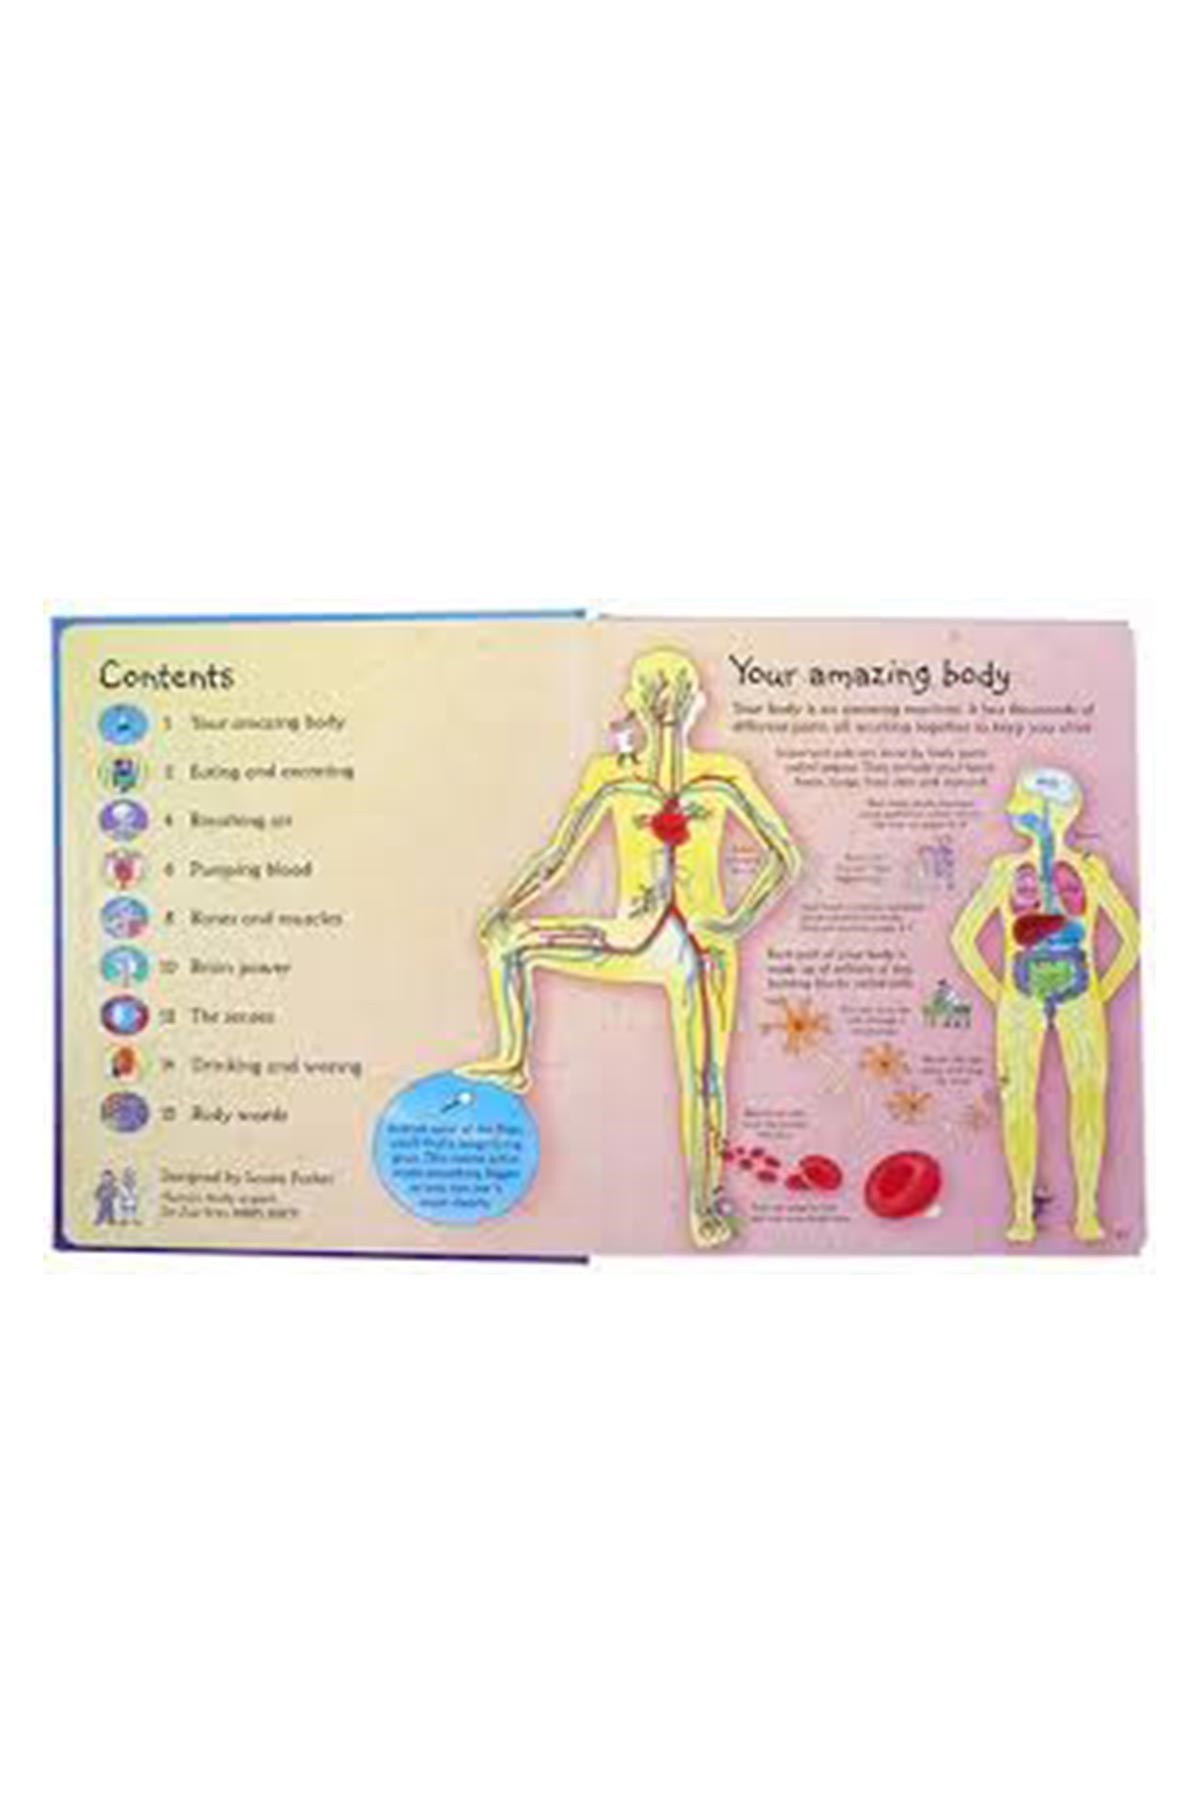 The Usborne See Inside Your Body